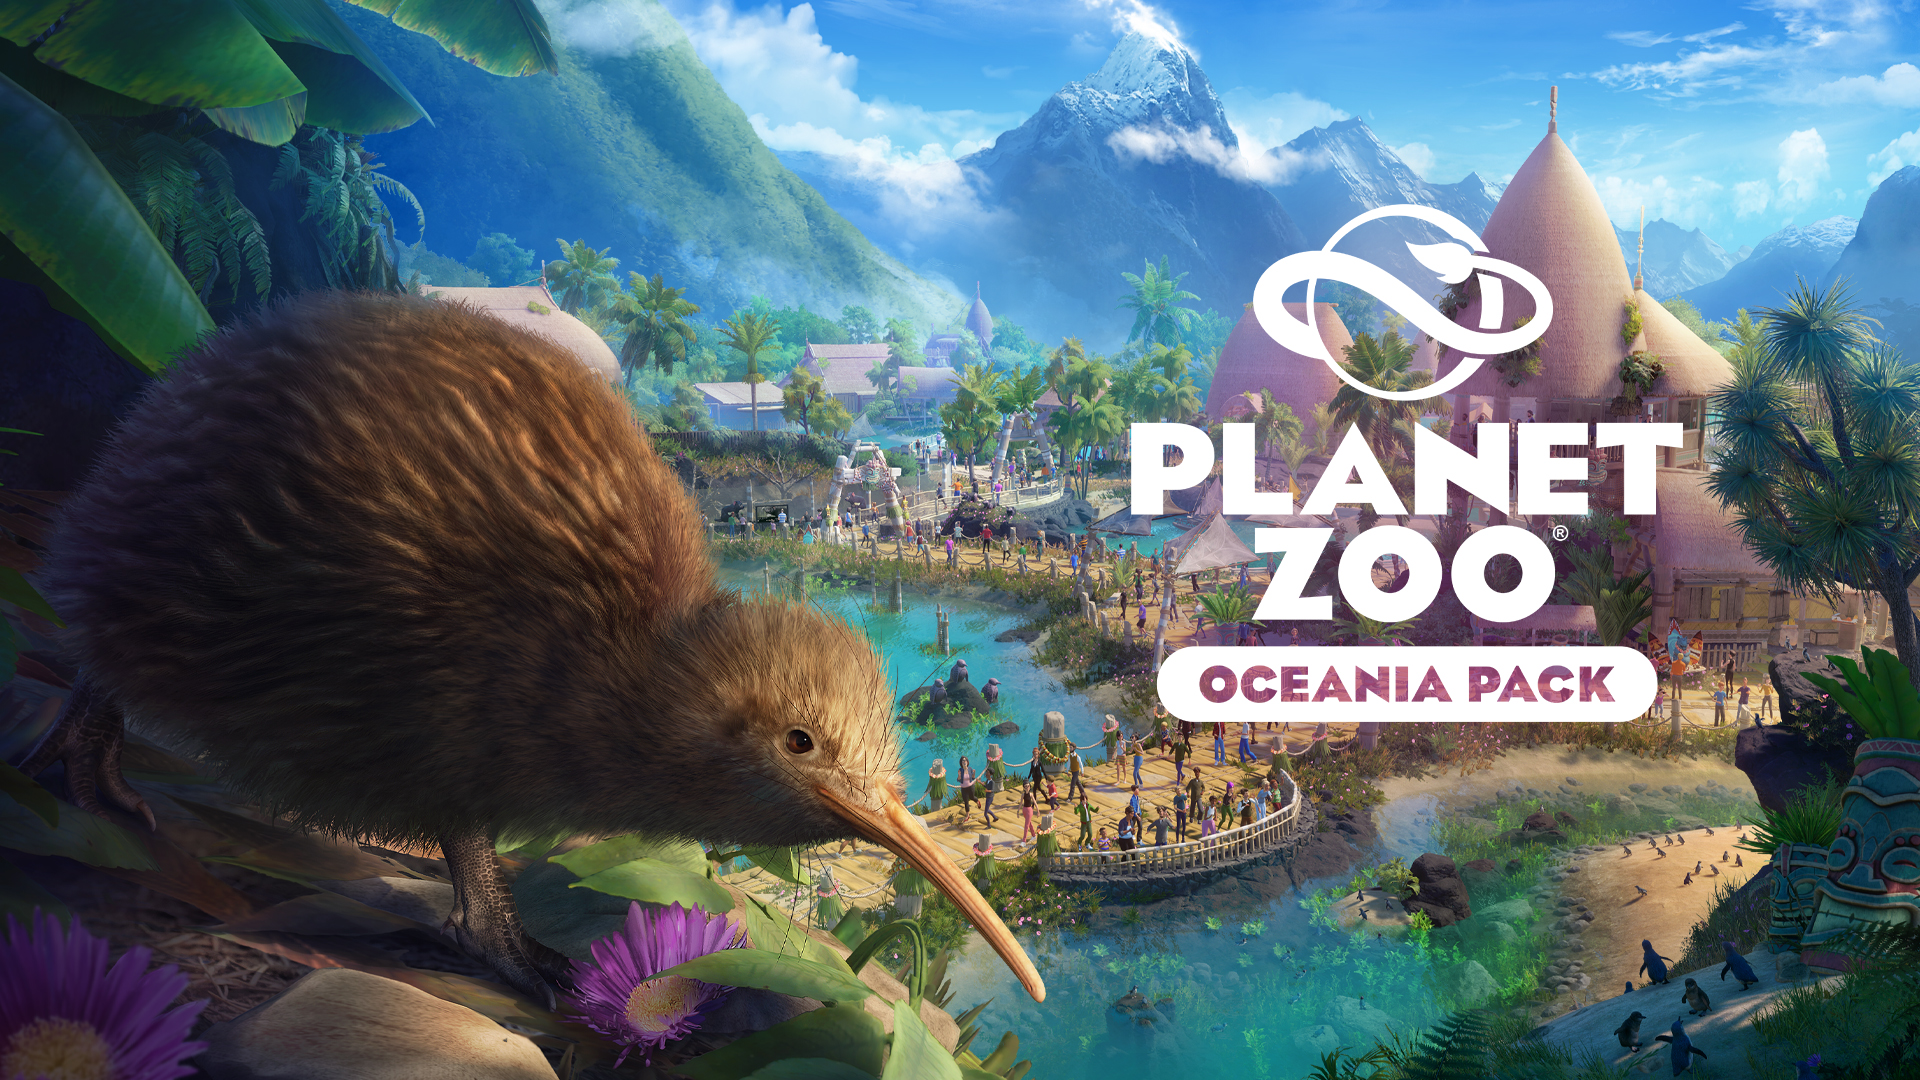 The key art for Planet Zoo's Oceania Pack, featuring a Kiwi bird overlooking a habitat with lots of water and bridges.